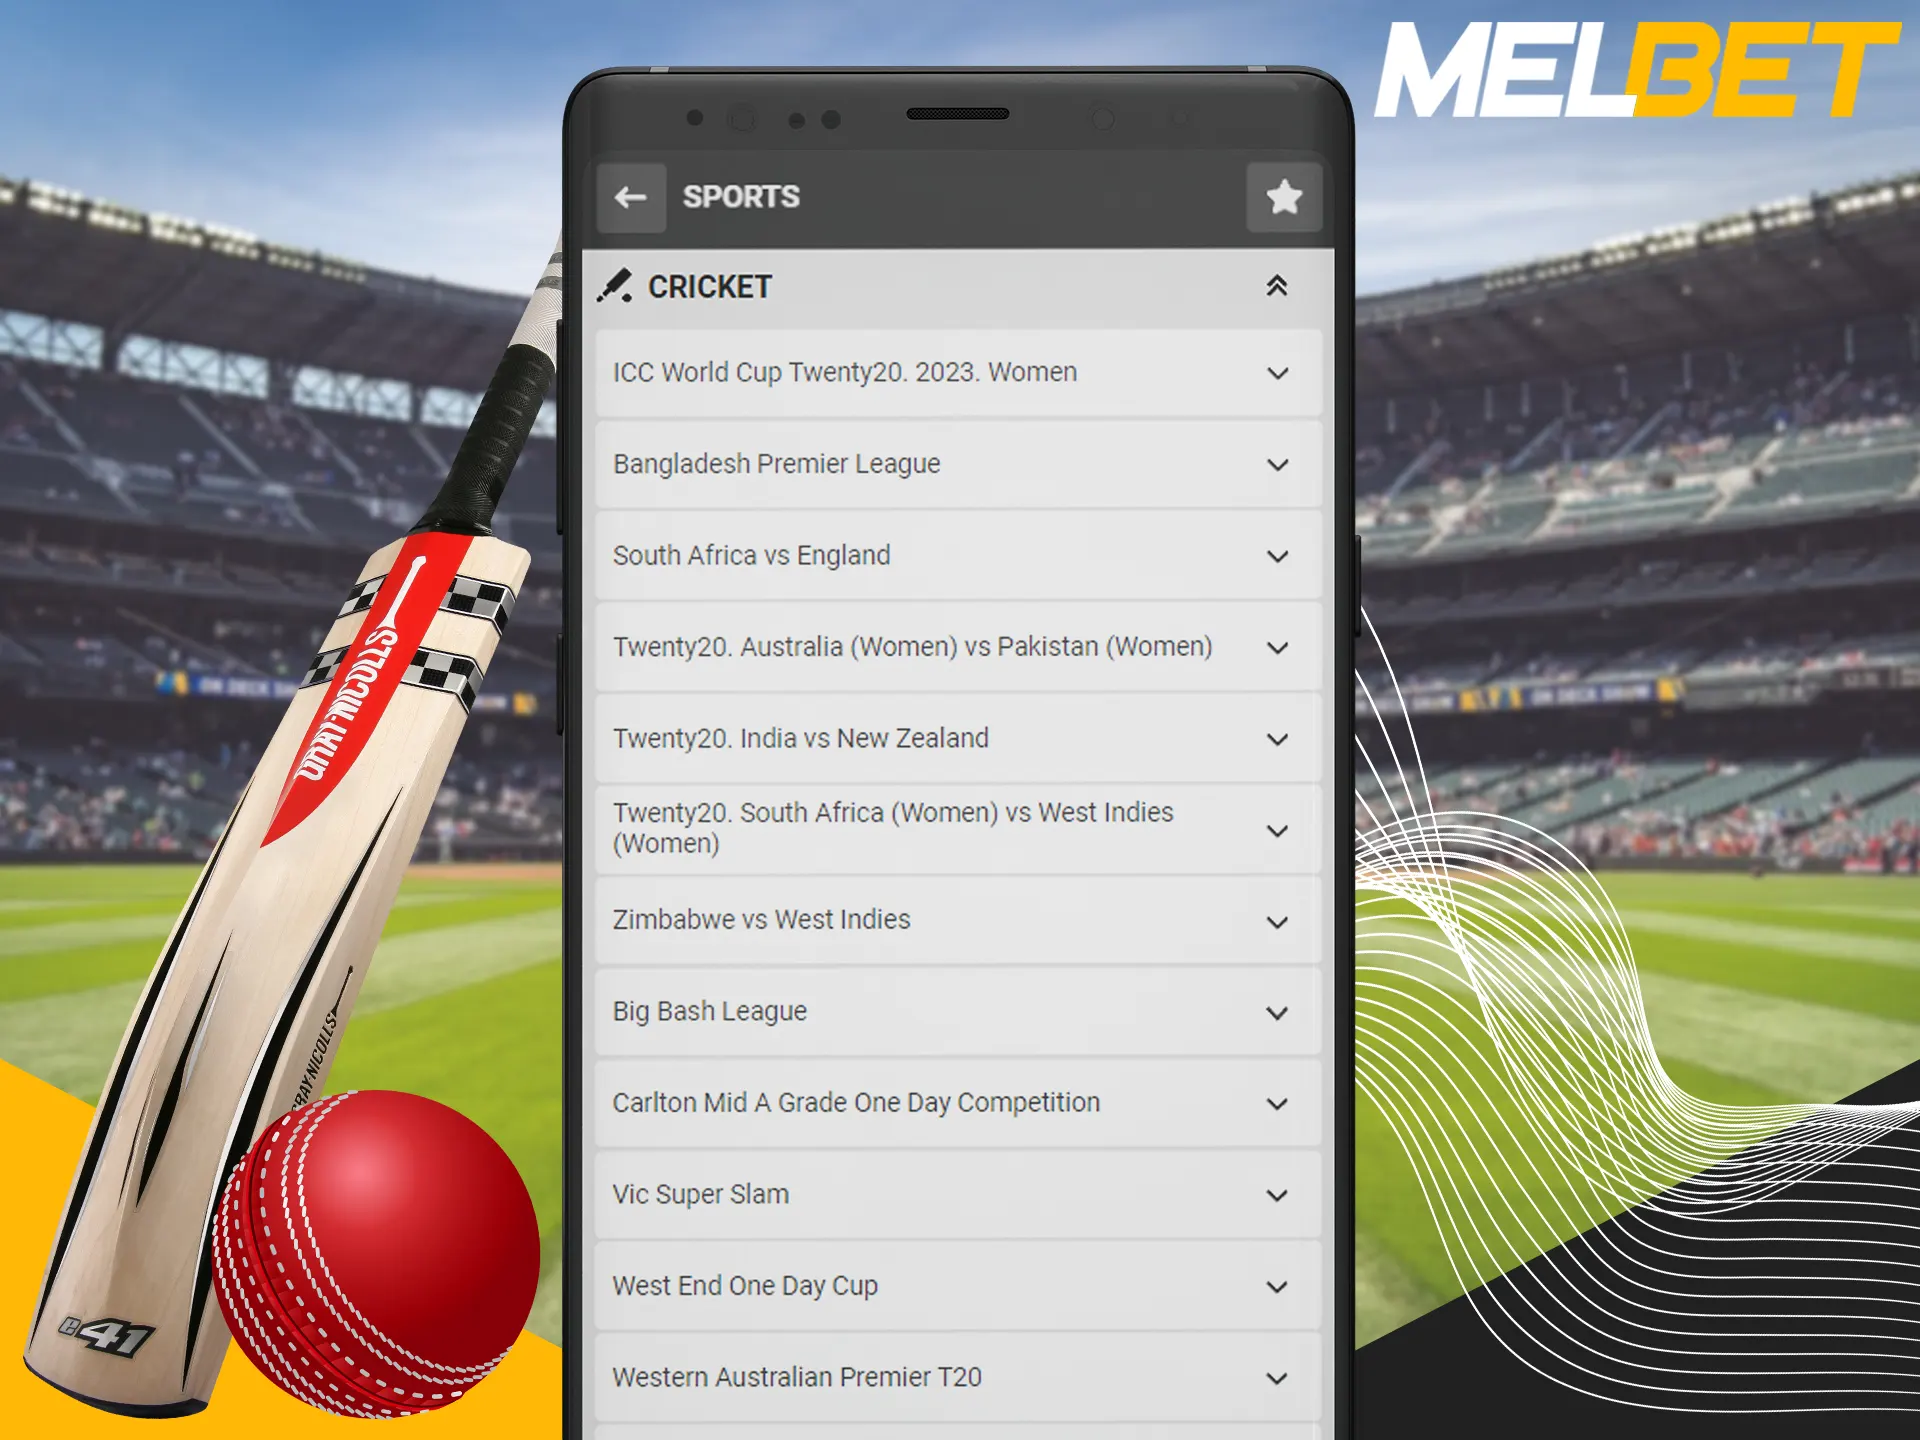 Make your cricket bets using the app.